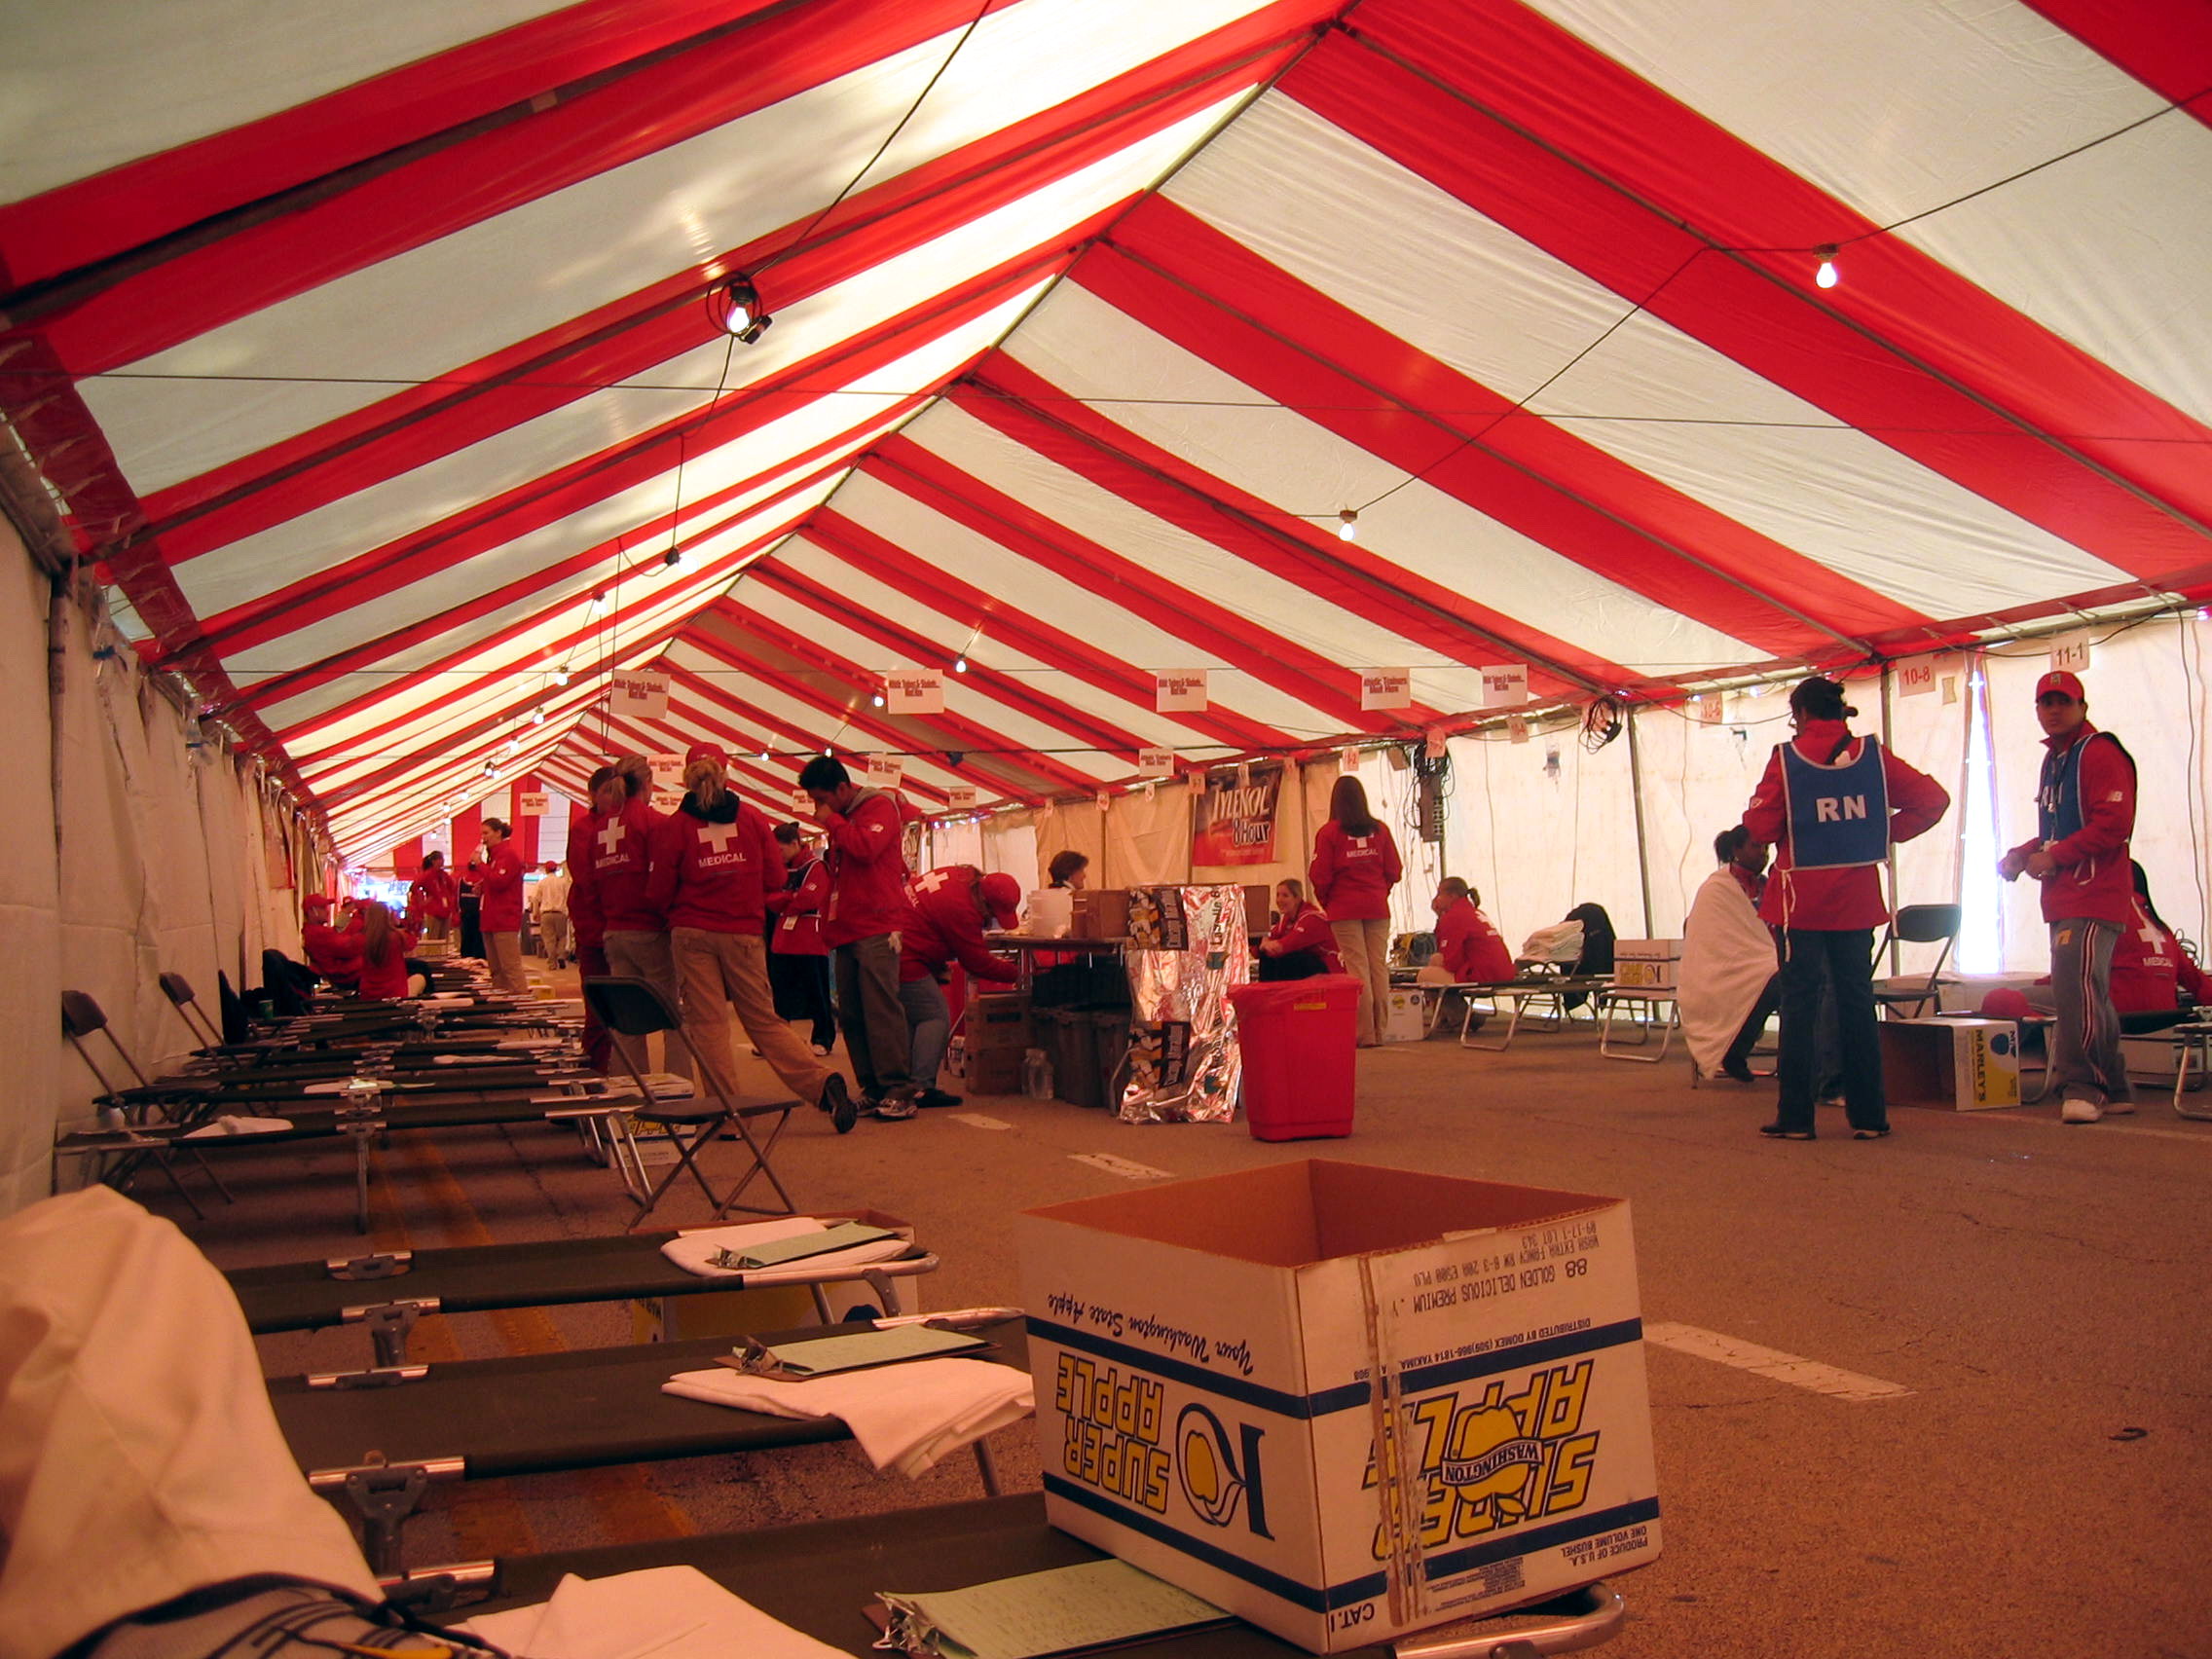 2005 Chicago Marathon finish line medical tent...before the madness